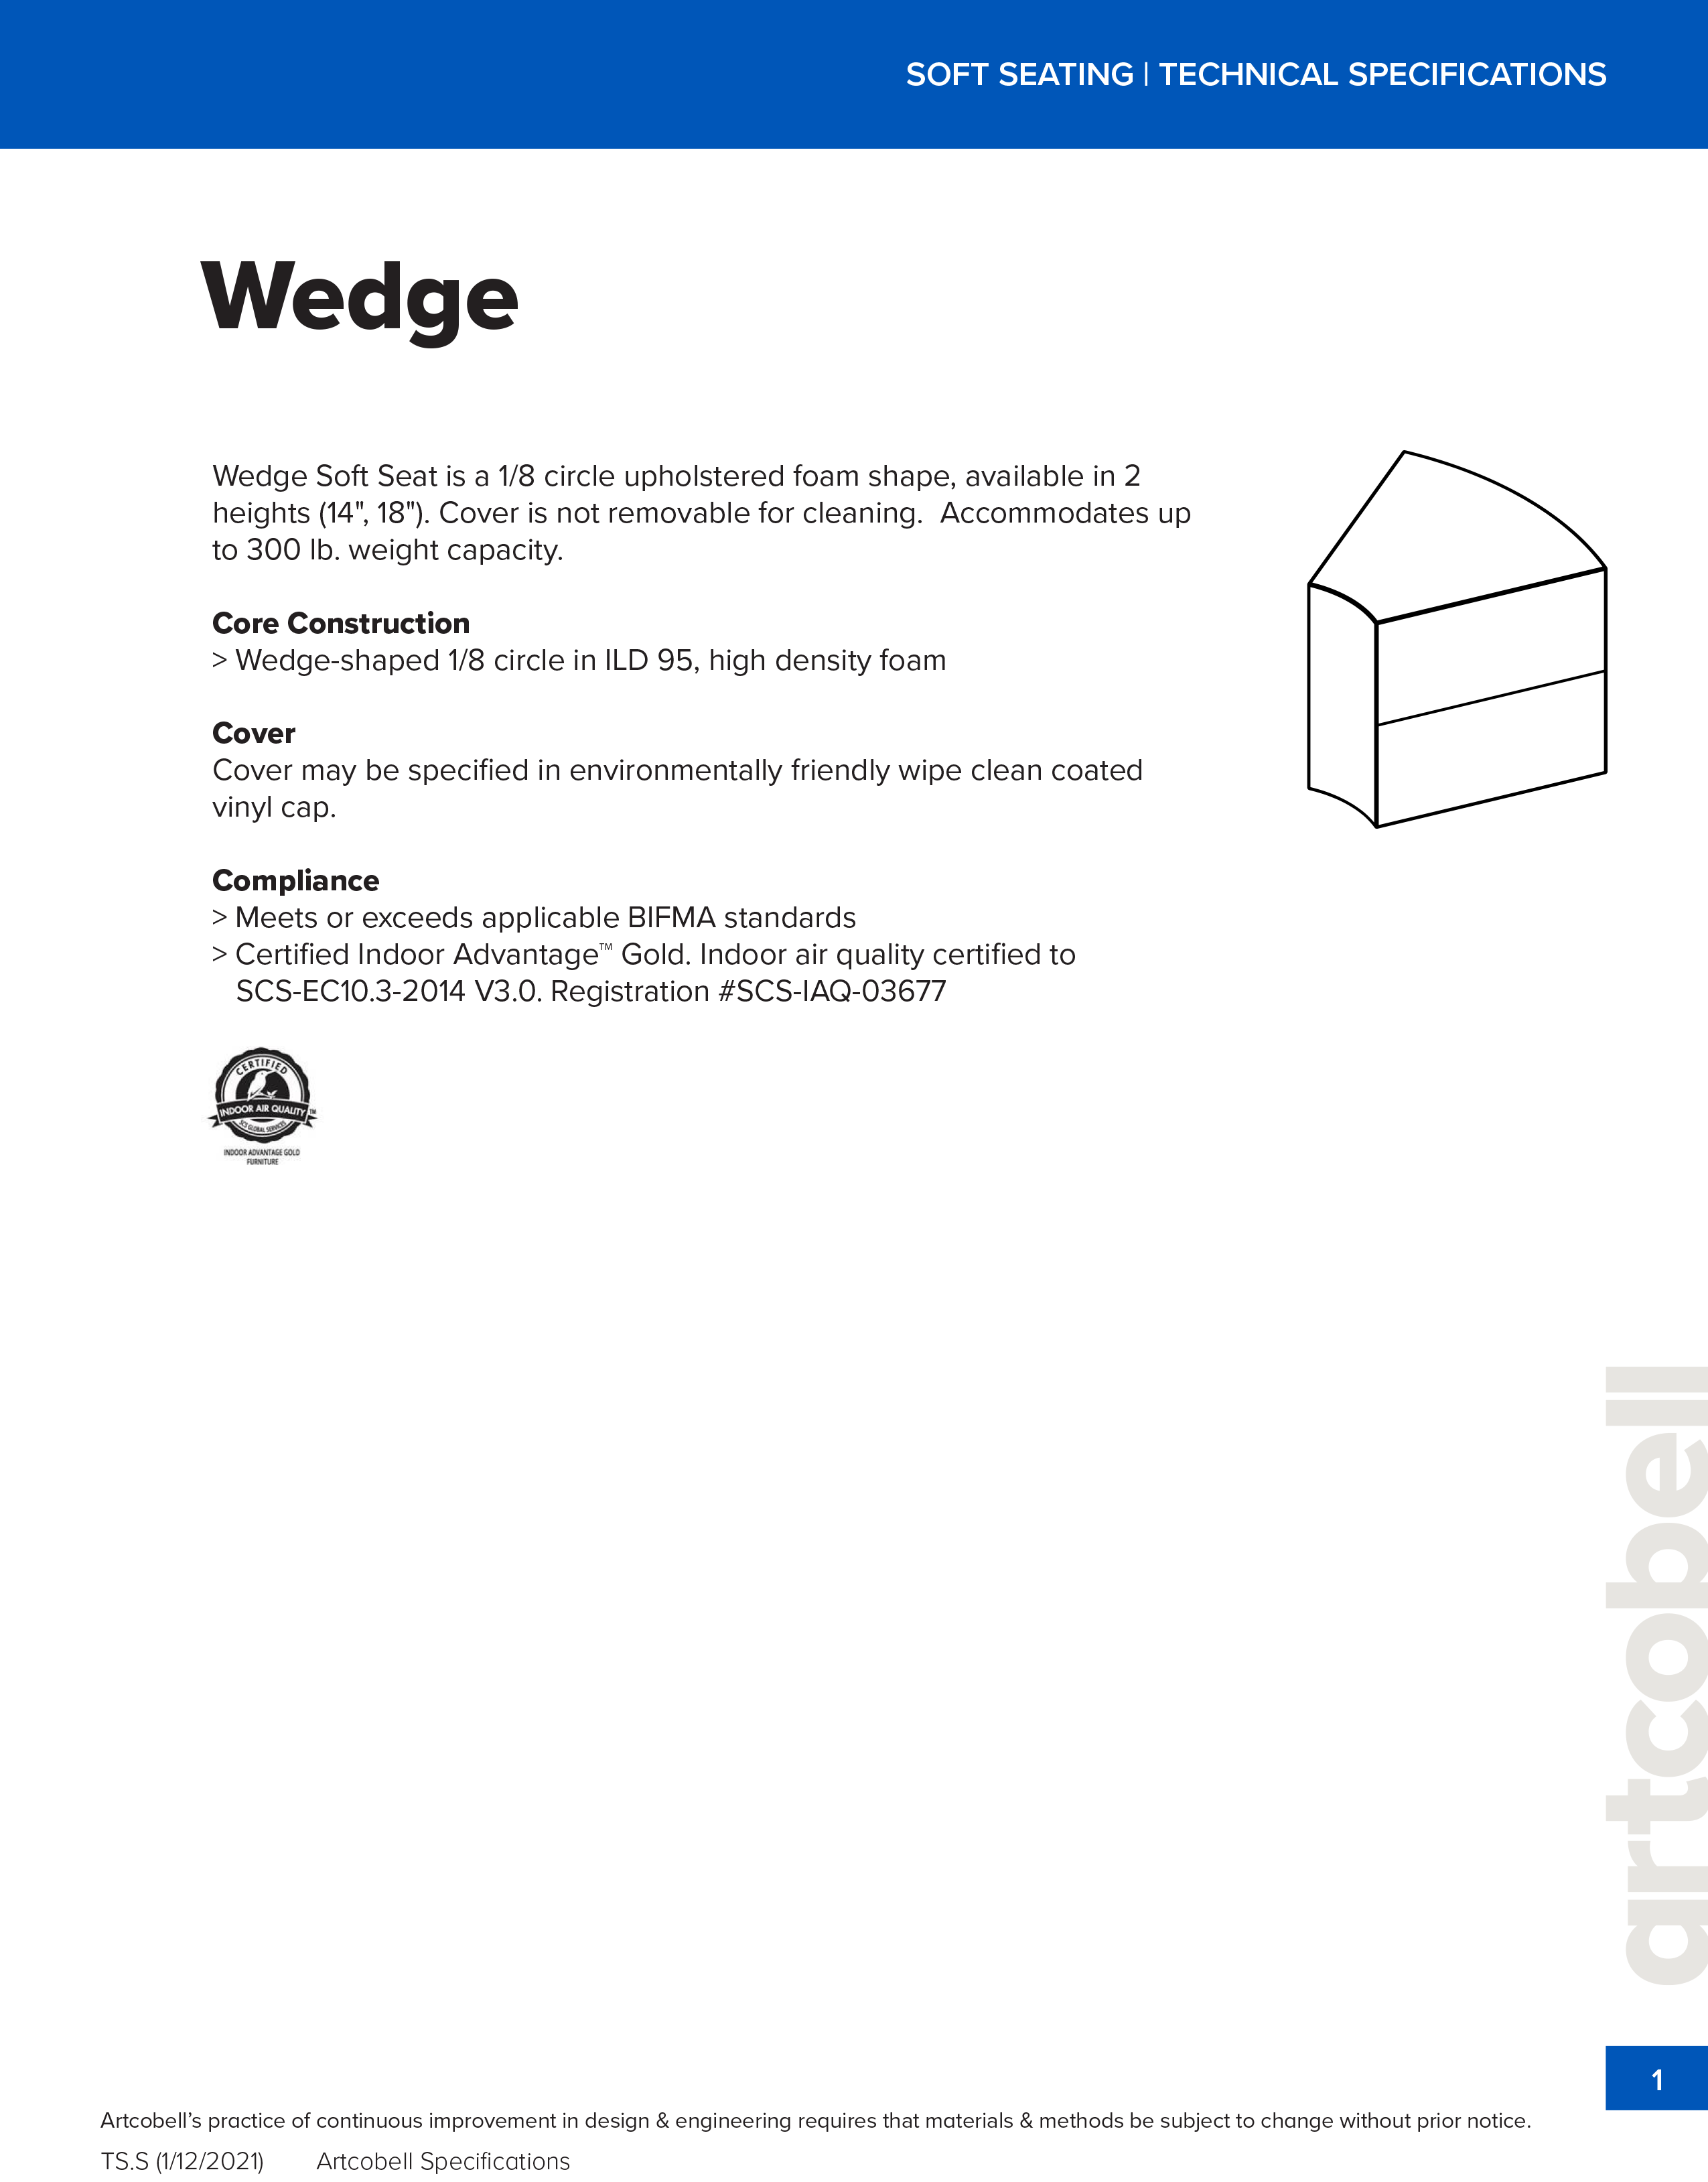 SoftSeatingSpecifications_Wedge